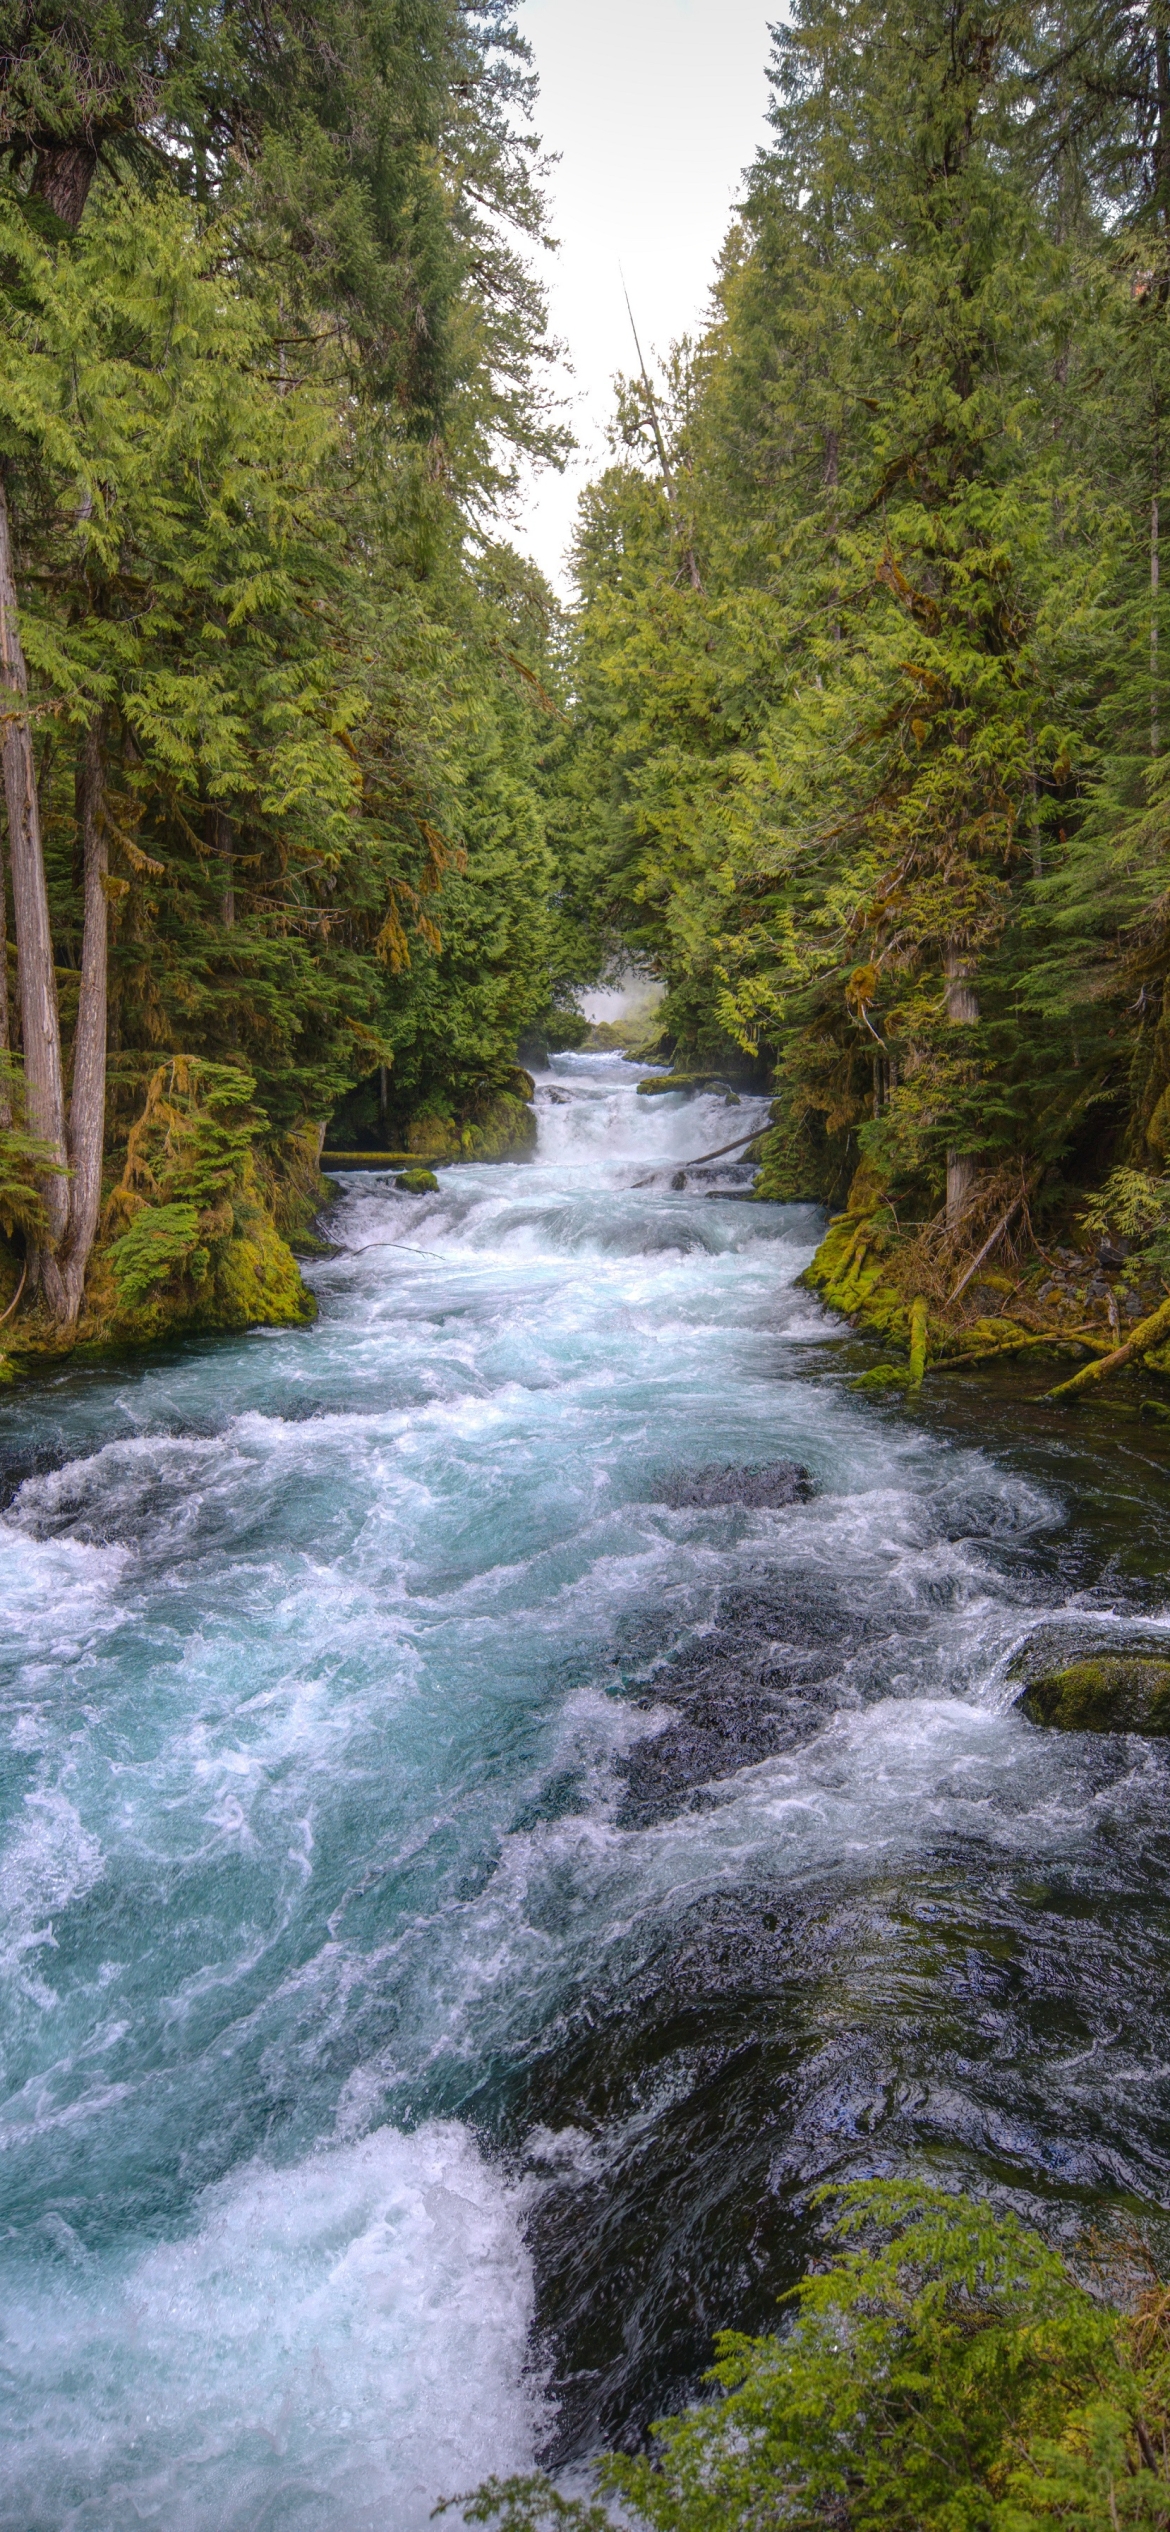 McKenzie River is a 90-mile tributary of the Willamette River in western Oregon in the USA by Hardebeck Media